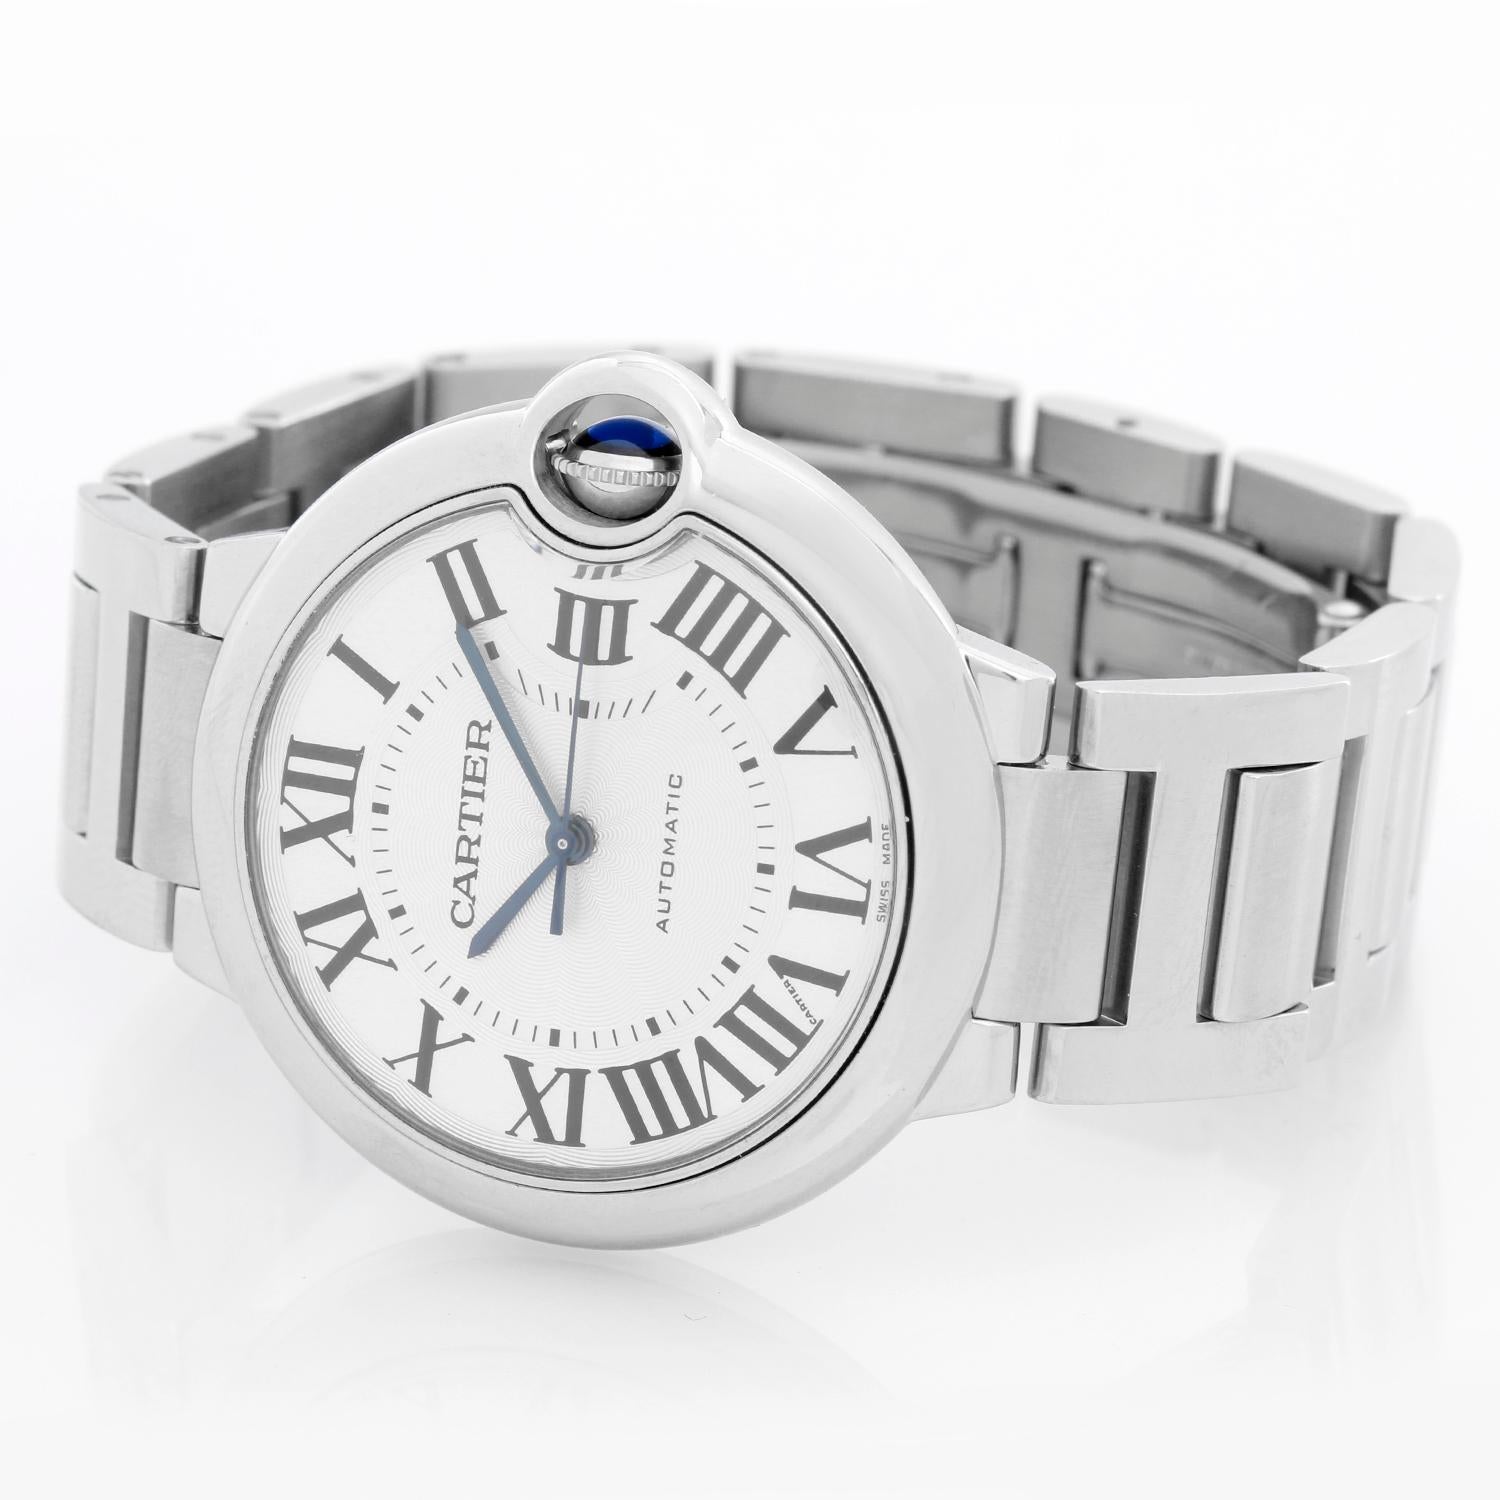 Cartier Ballon Bleu Midsize Stainless Steel Watch W6920046 - Automatic. Stainless steel case (36mm). Silver guilloche dial with black Roman numerals. Stainless steel Cartier bracelet with deployant clasp.. Pre-owned with custom box.